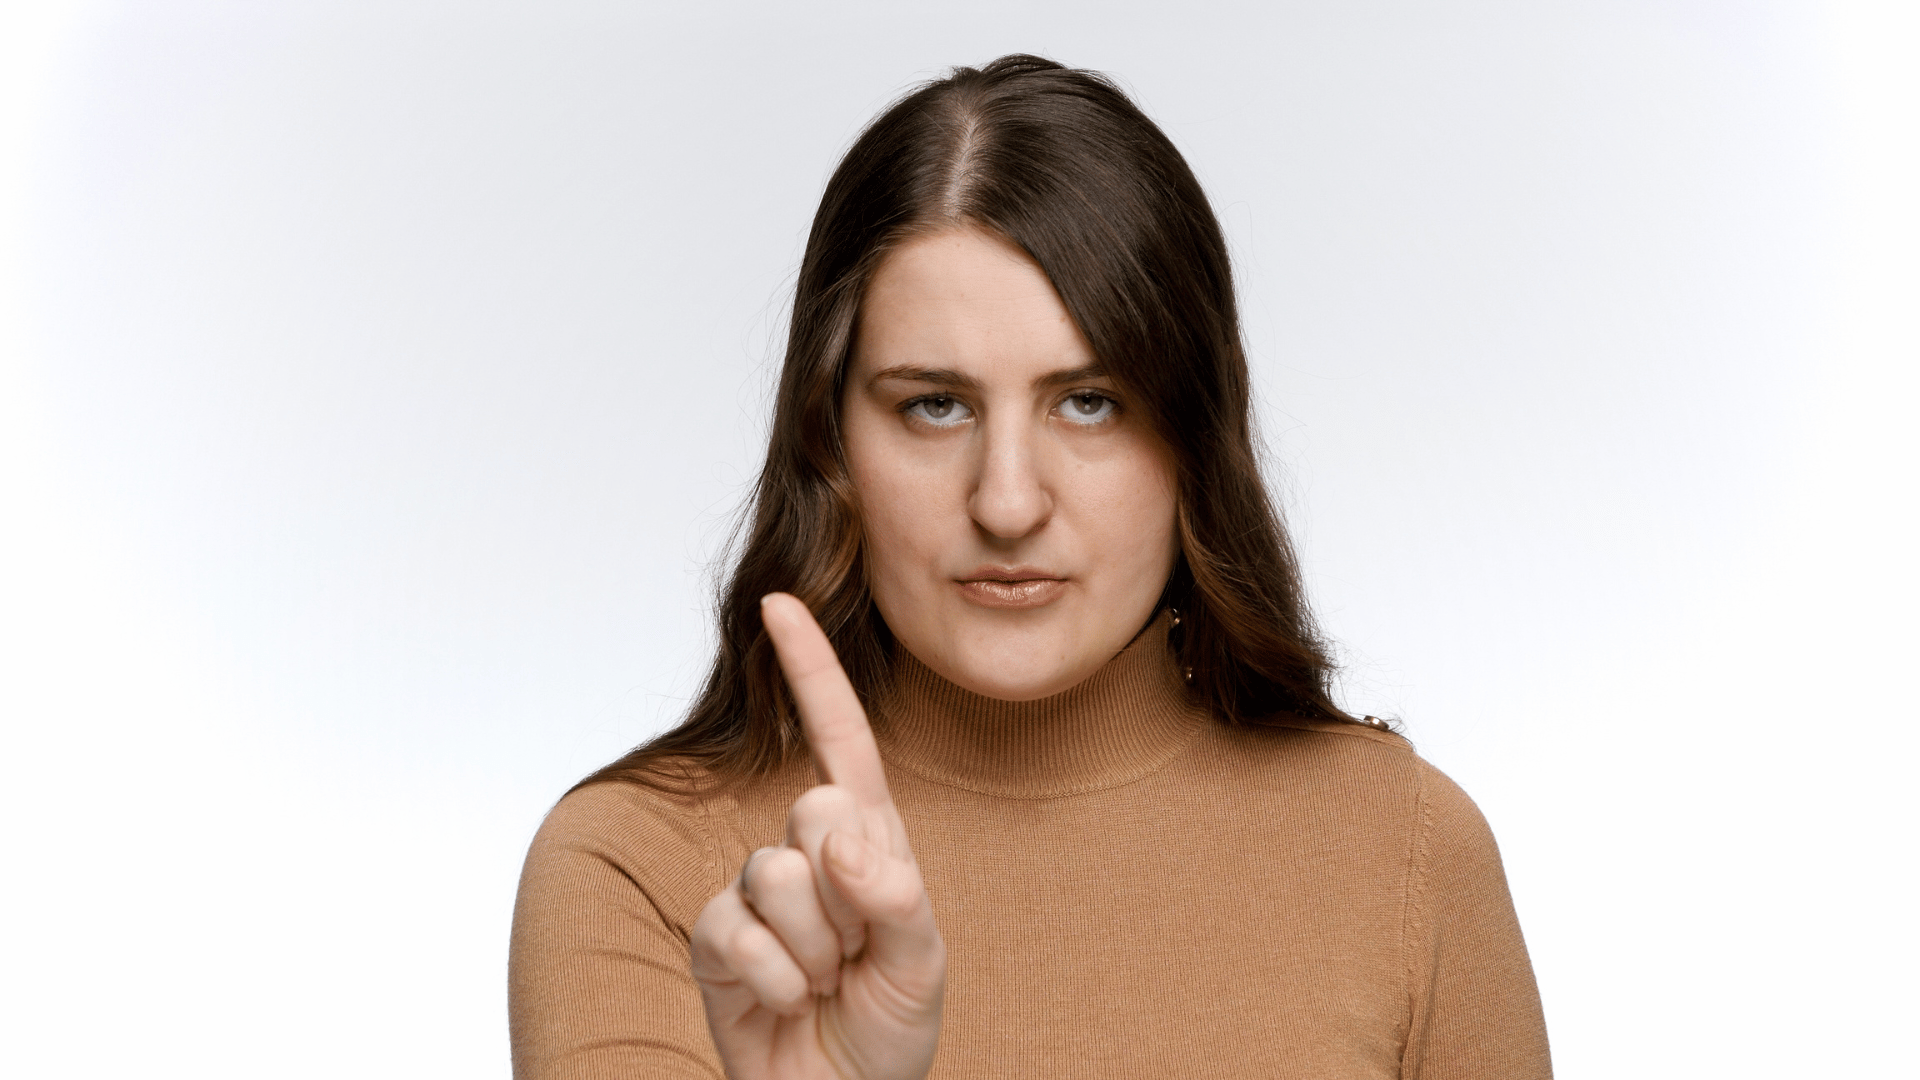 Woman making a gesture to say no